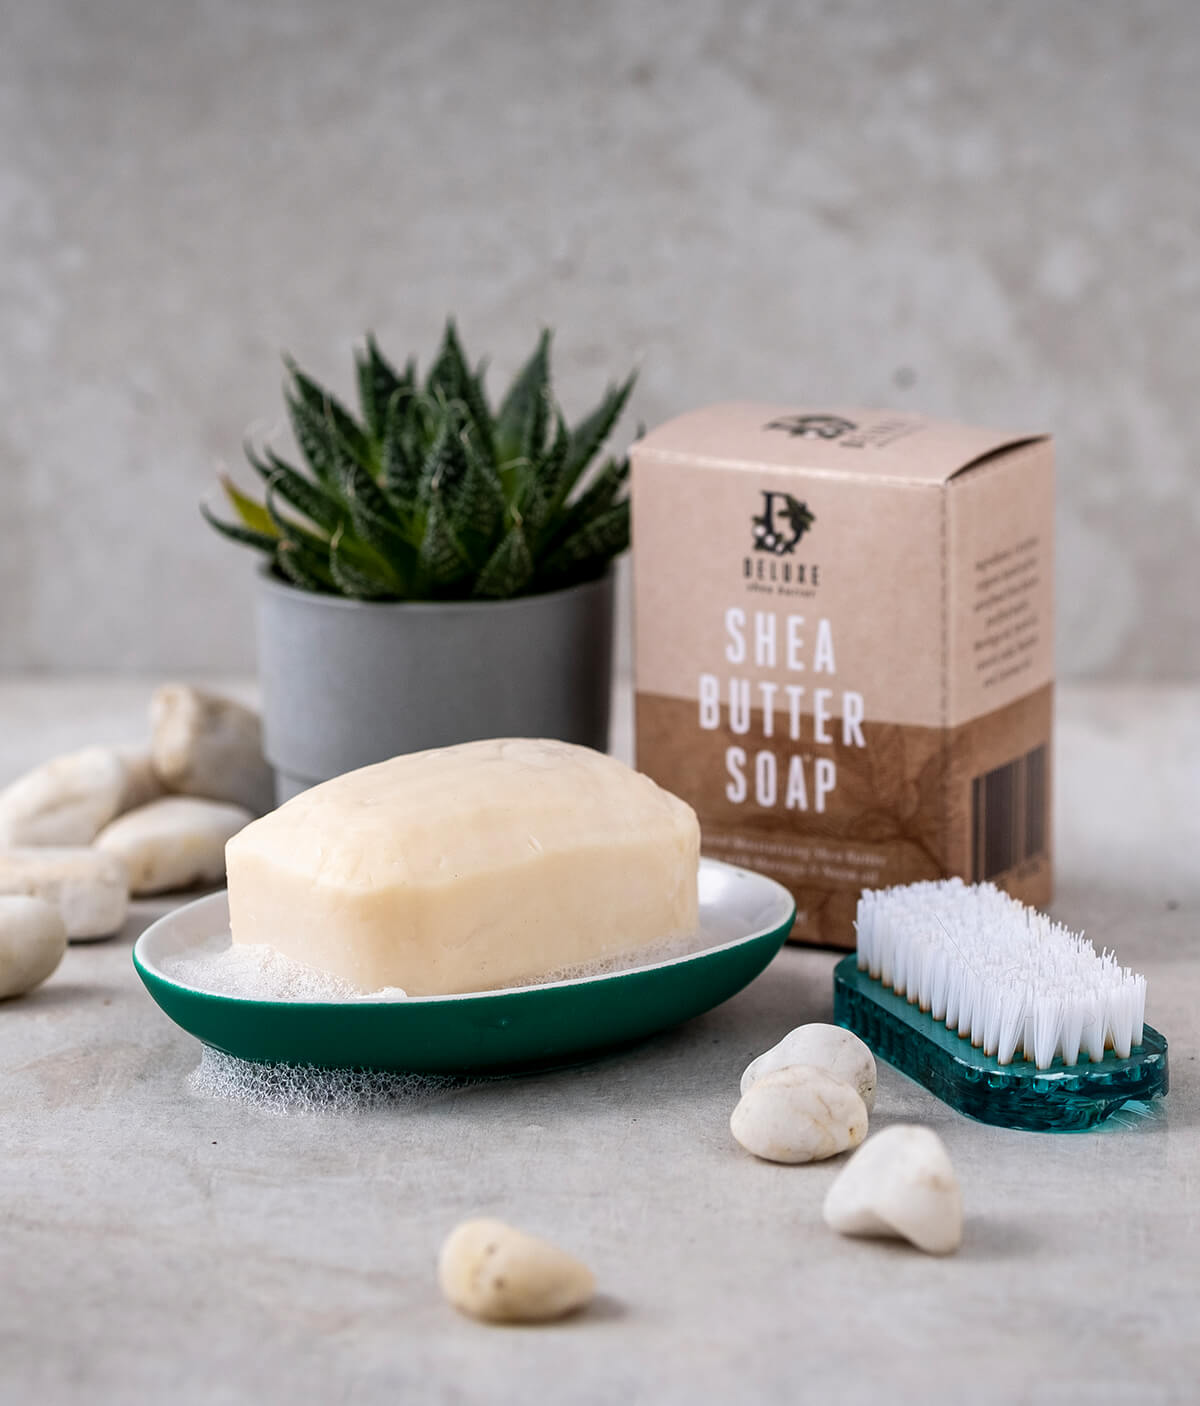 Deluxe Shea Butter® Soap bar, in a dish with suds, next to product box and a scrubbing brush.